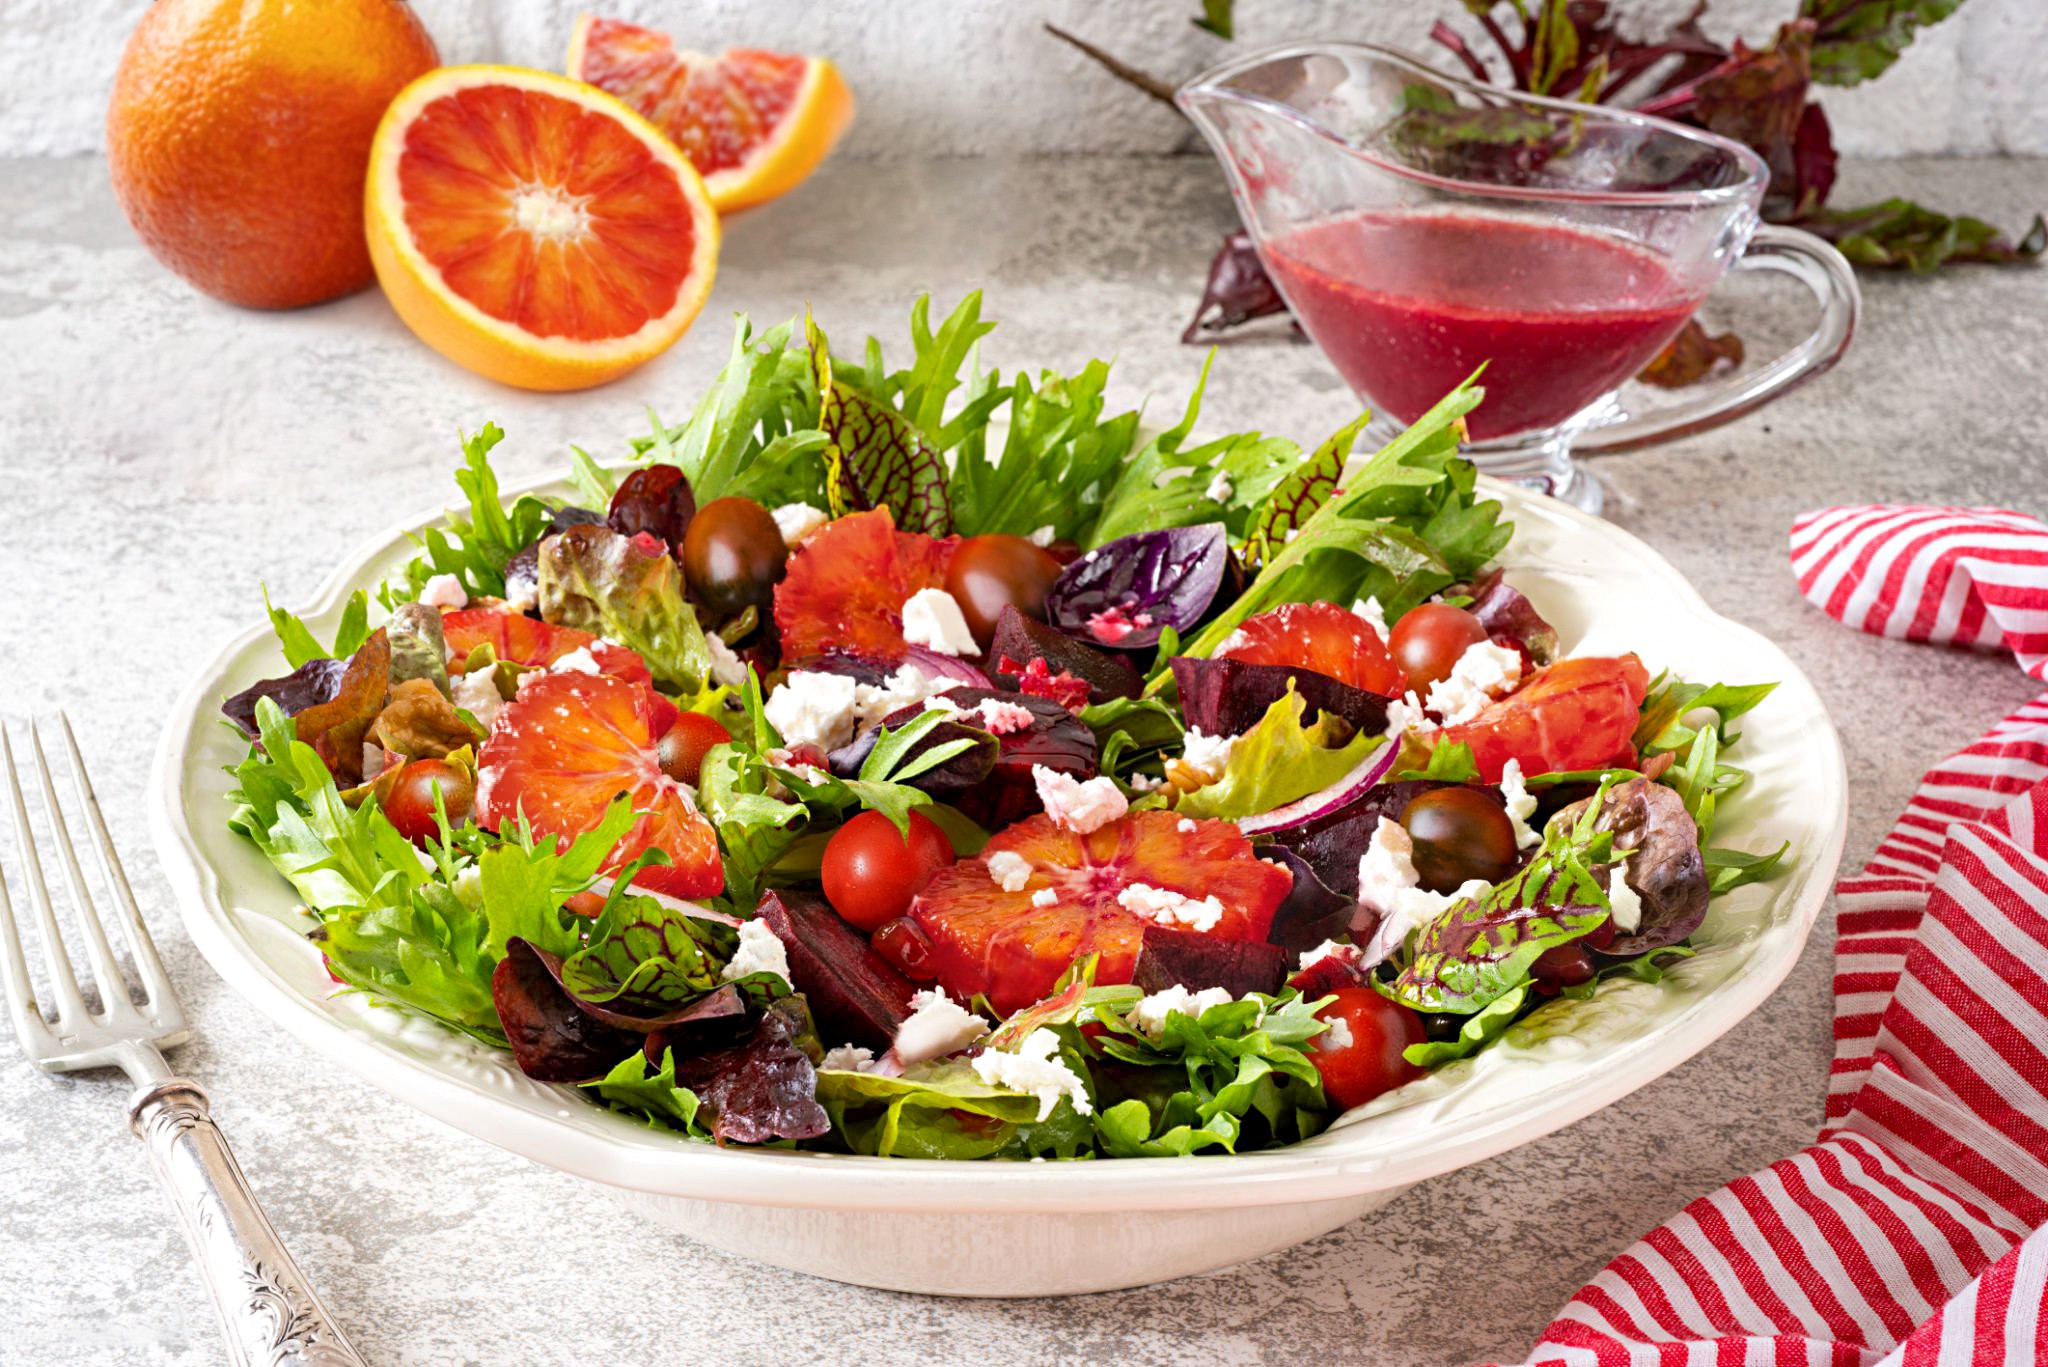 Roasted Beet, Blood Orange, and Queso Fresco Salad